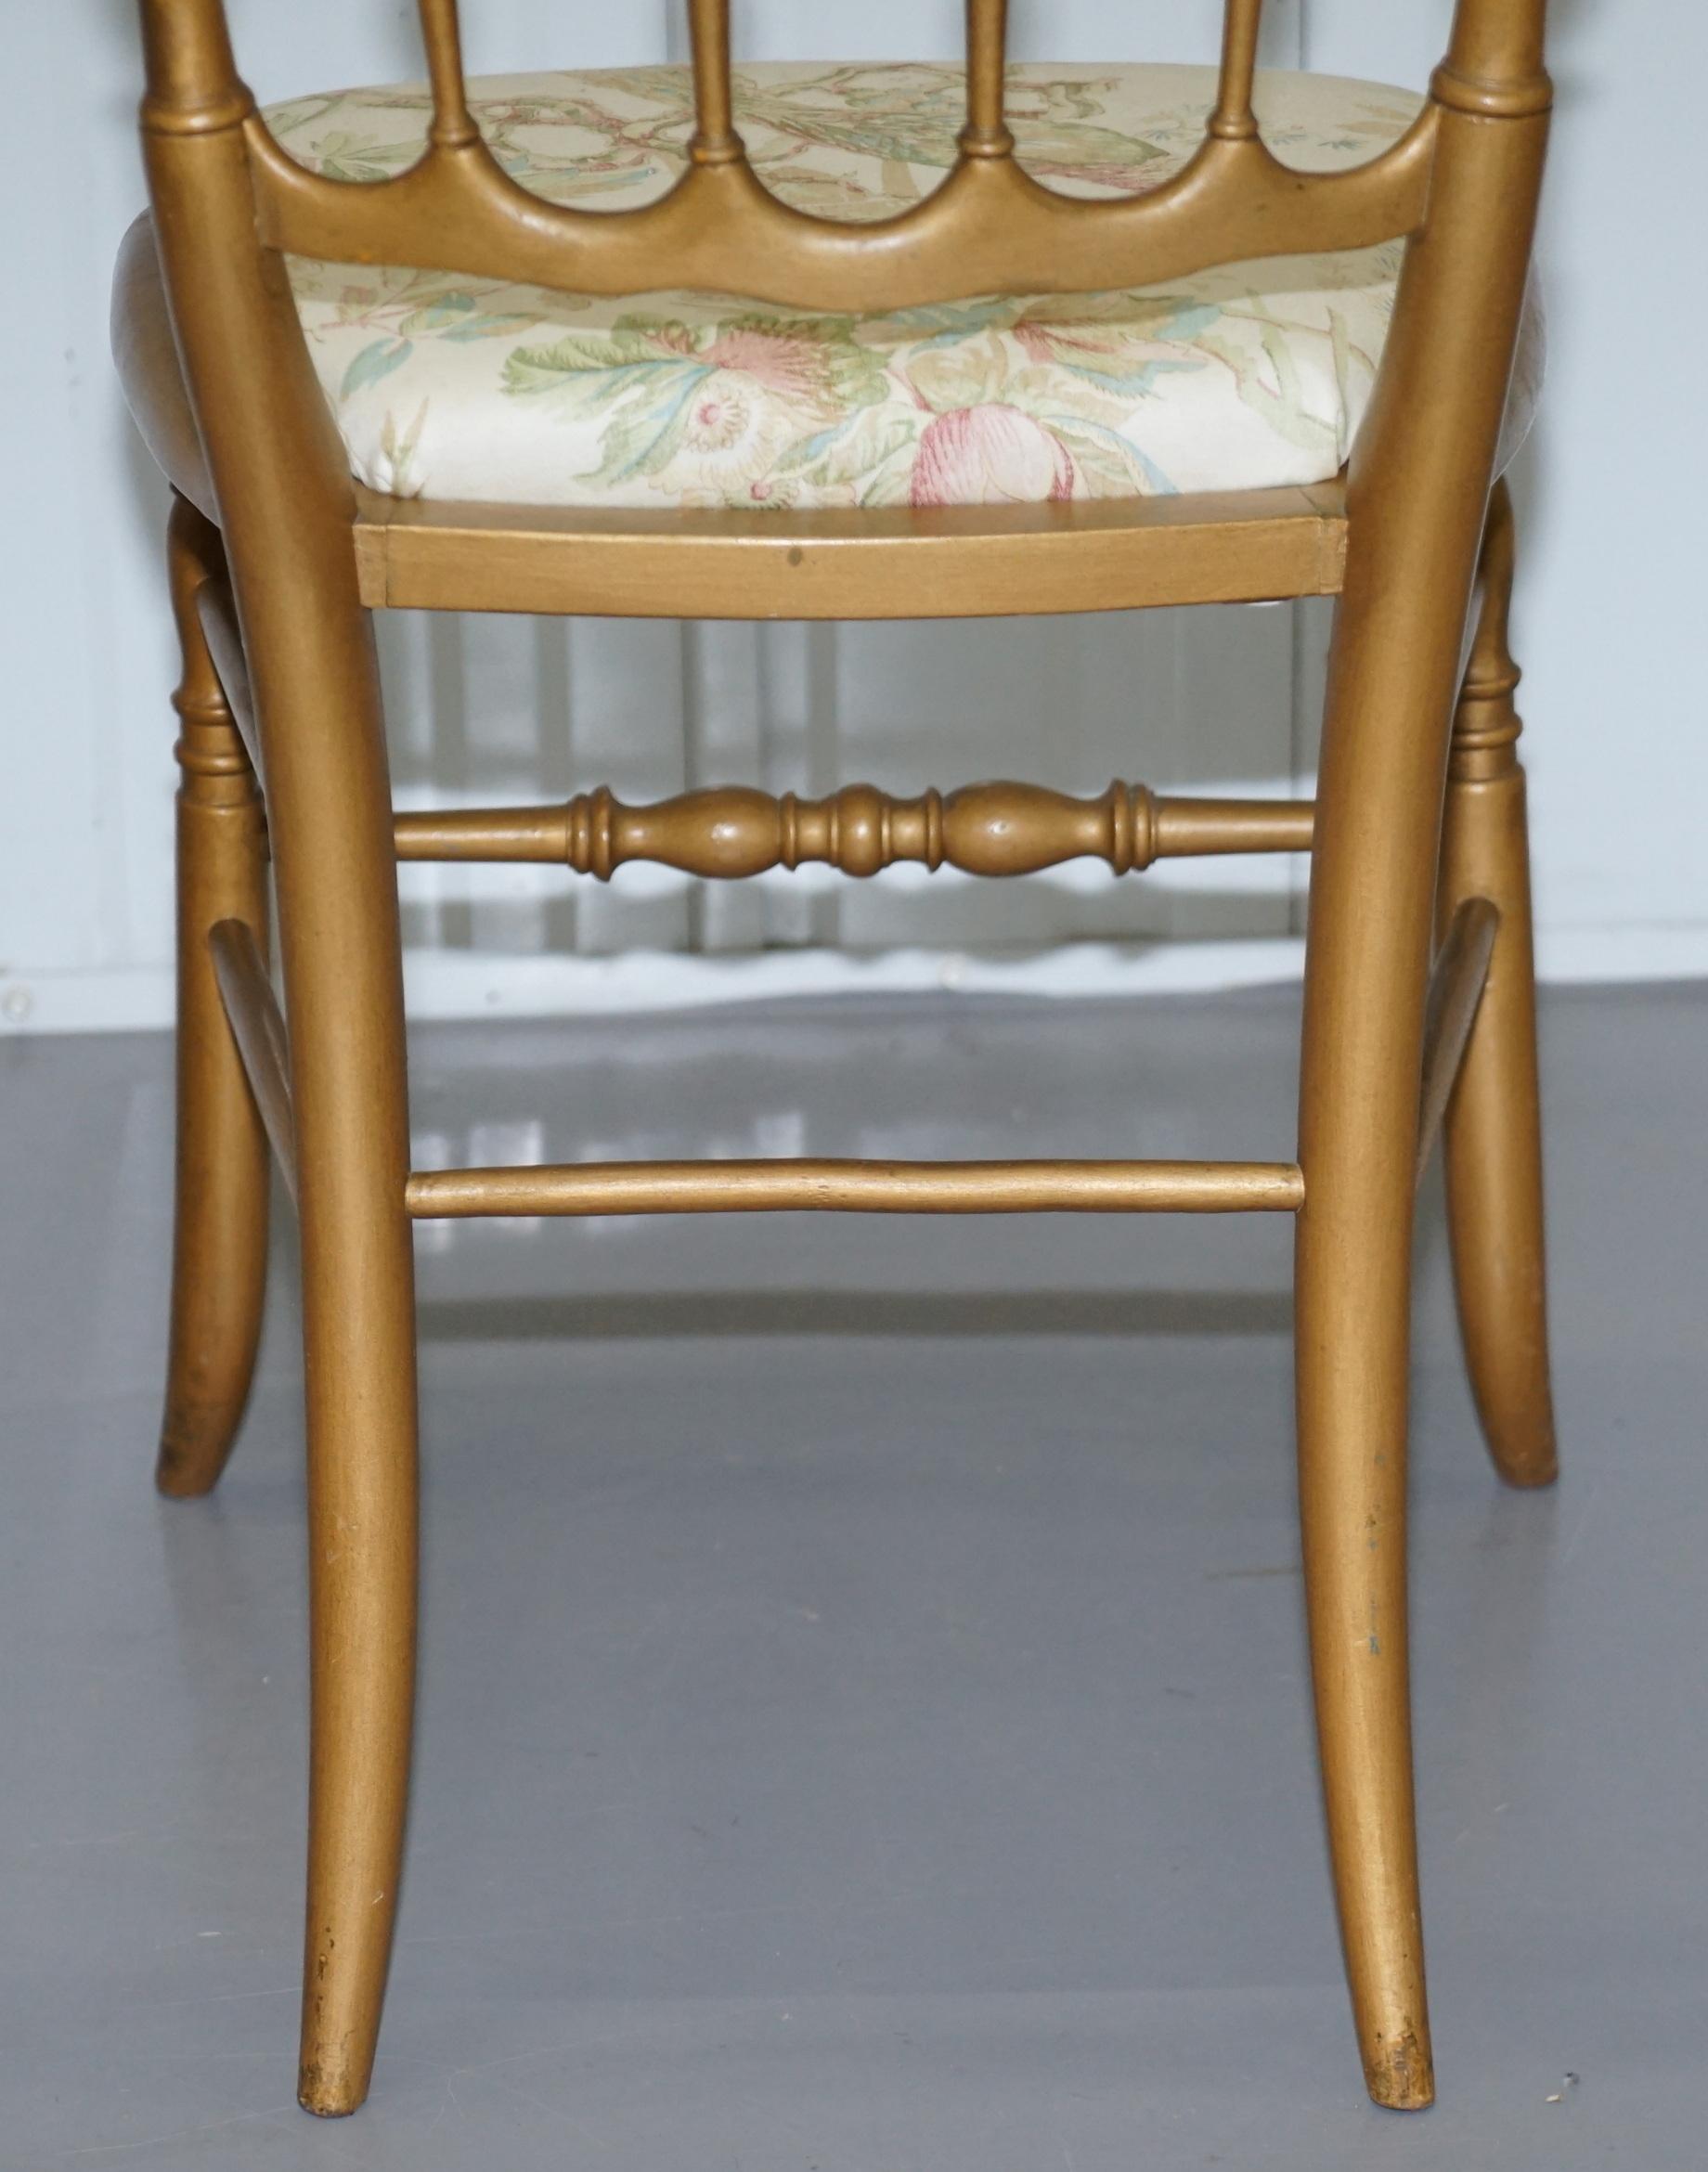 Regency Style Gold Giltwood Spindle Chair circa 1900 Ornate Bird Upholstery For Sale 8